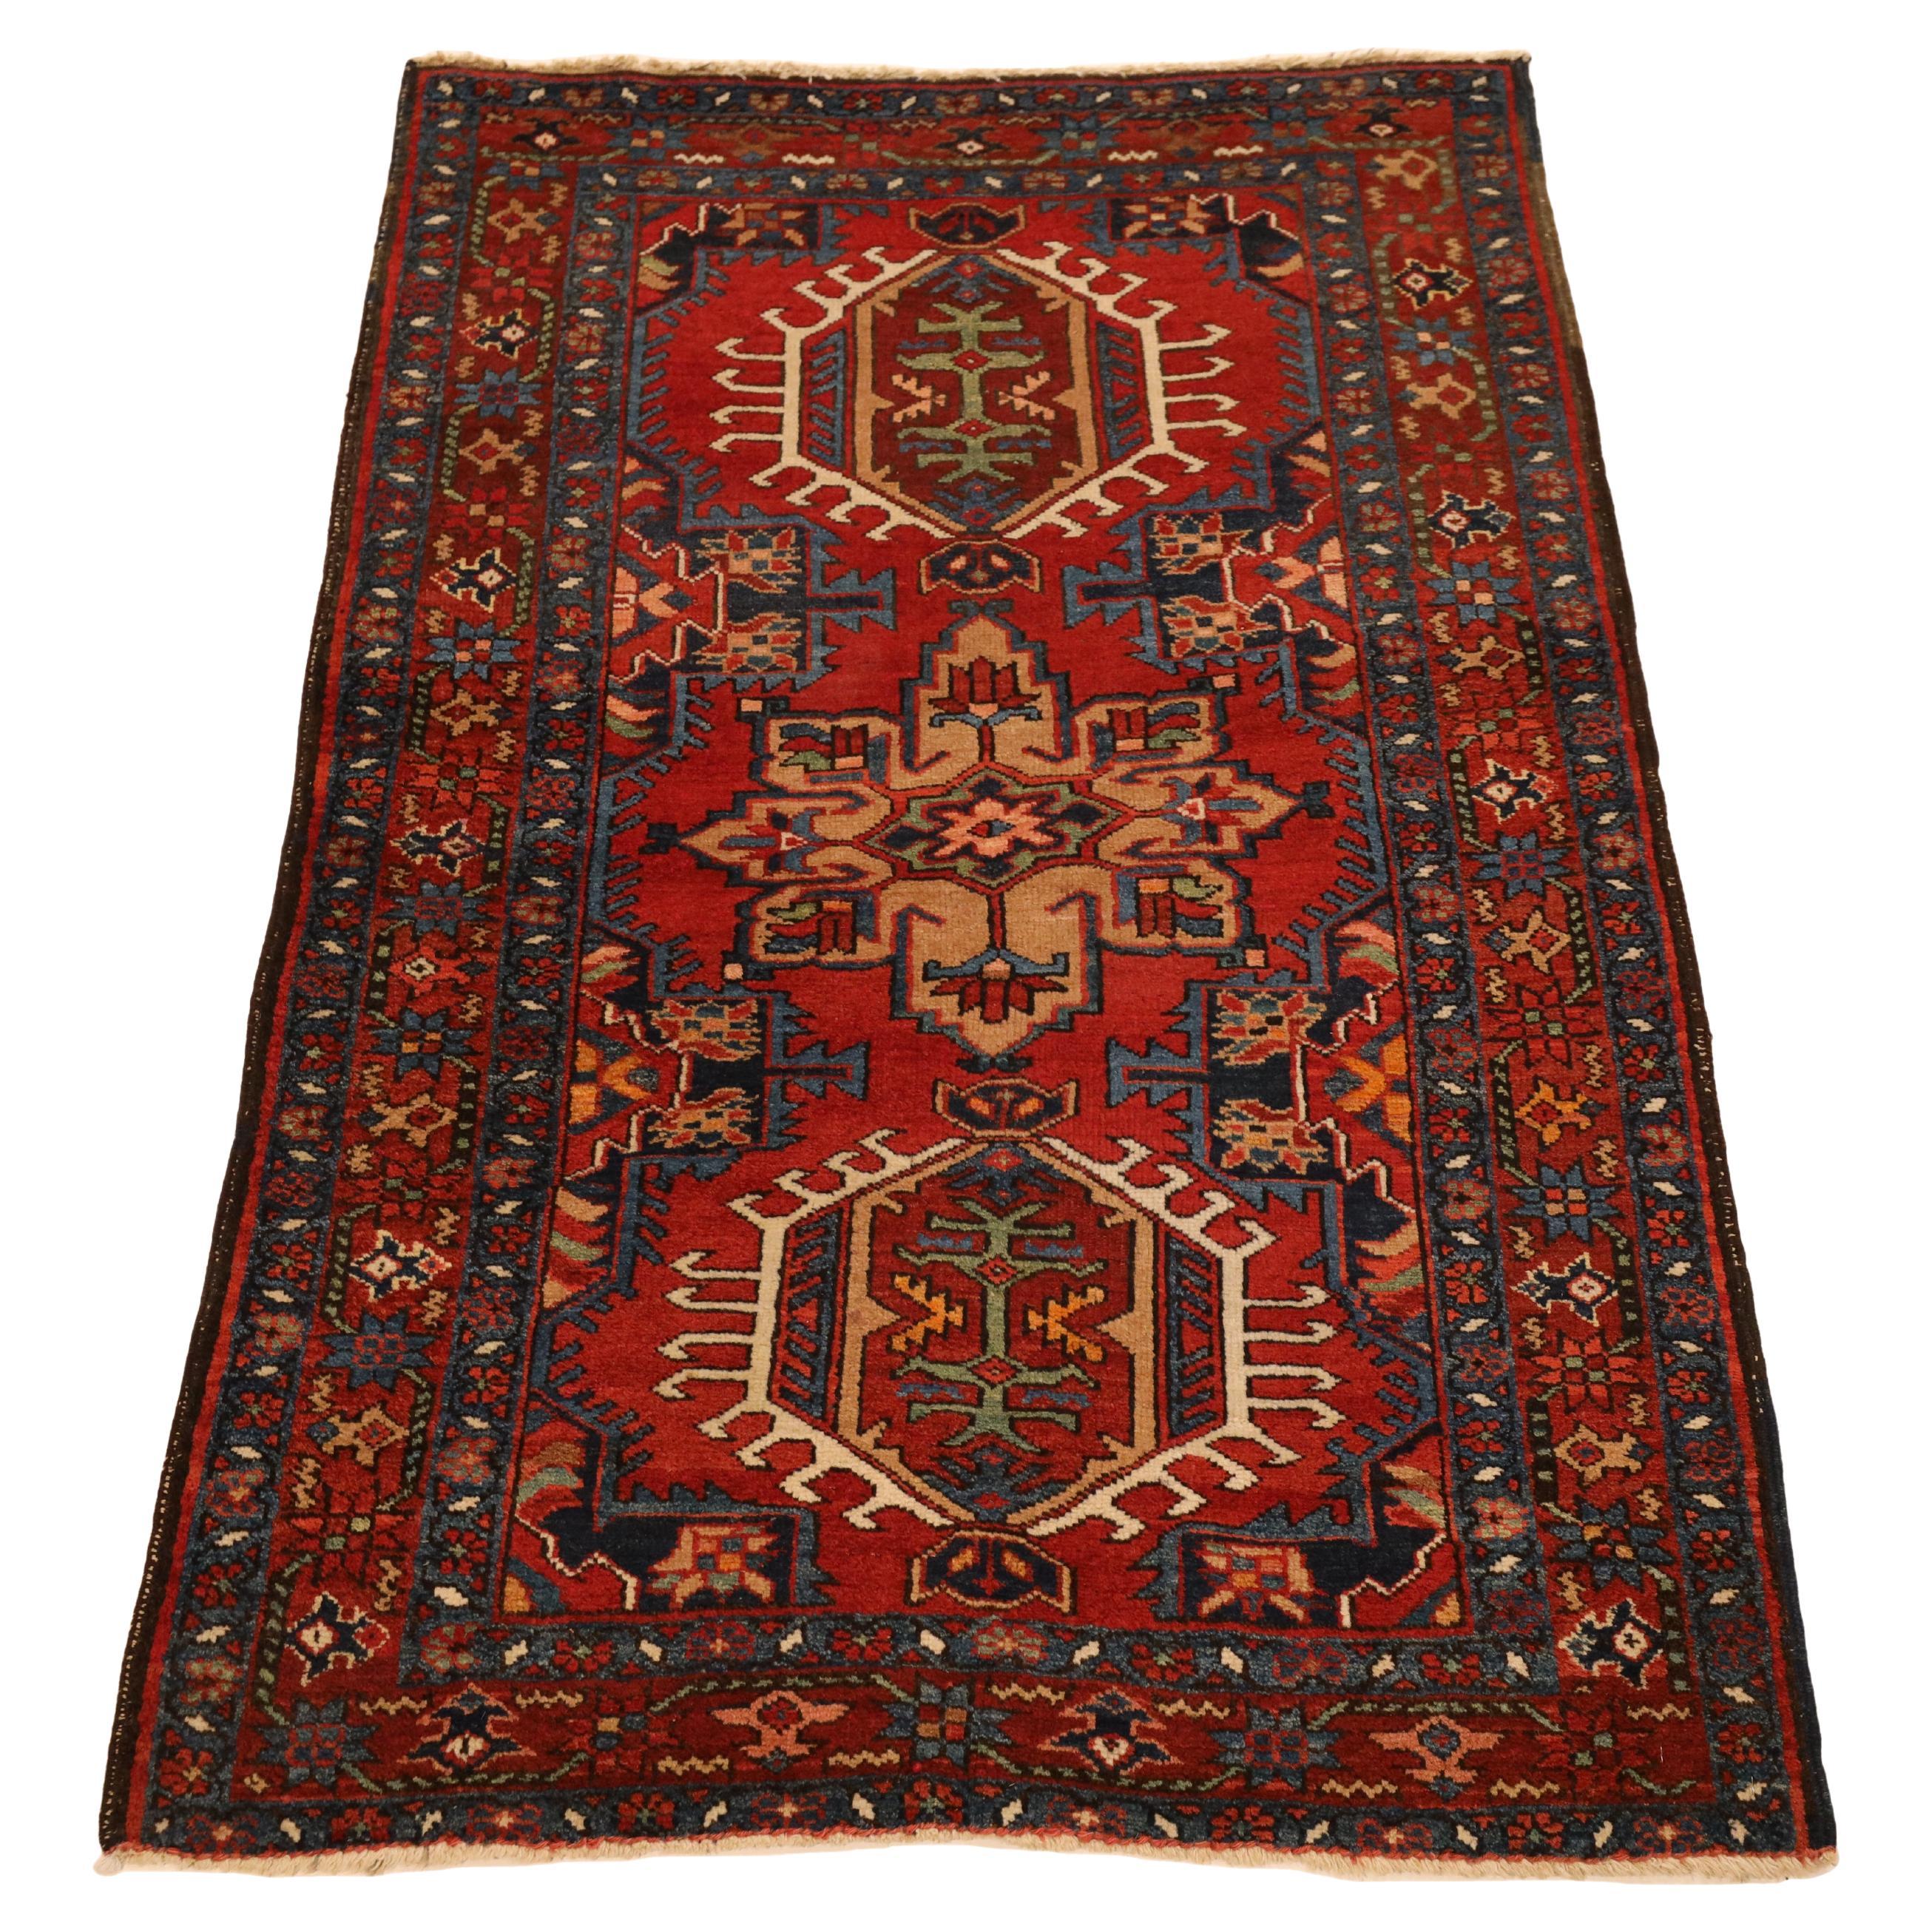 N.W. Persian Semi-Antique rug, Red Beige Sea-Green - 3'2" x 4'7" For Sale